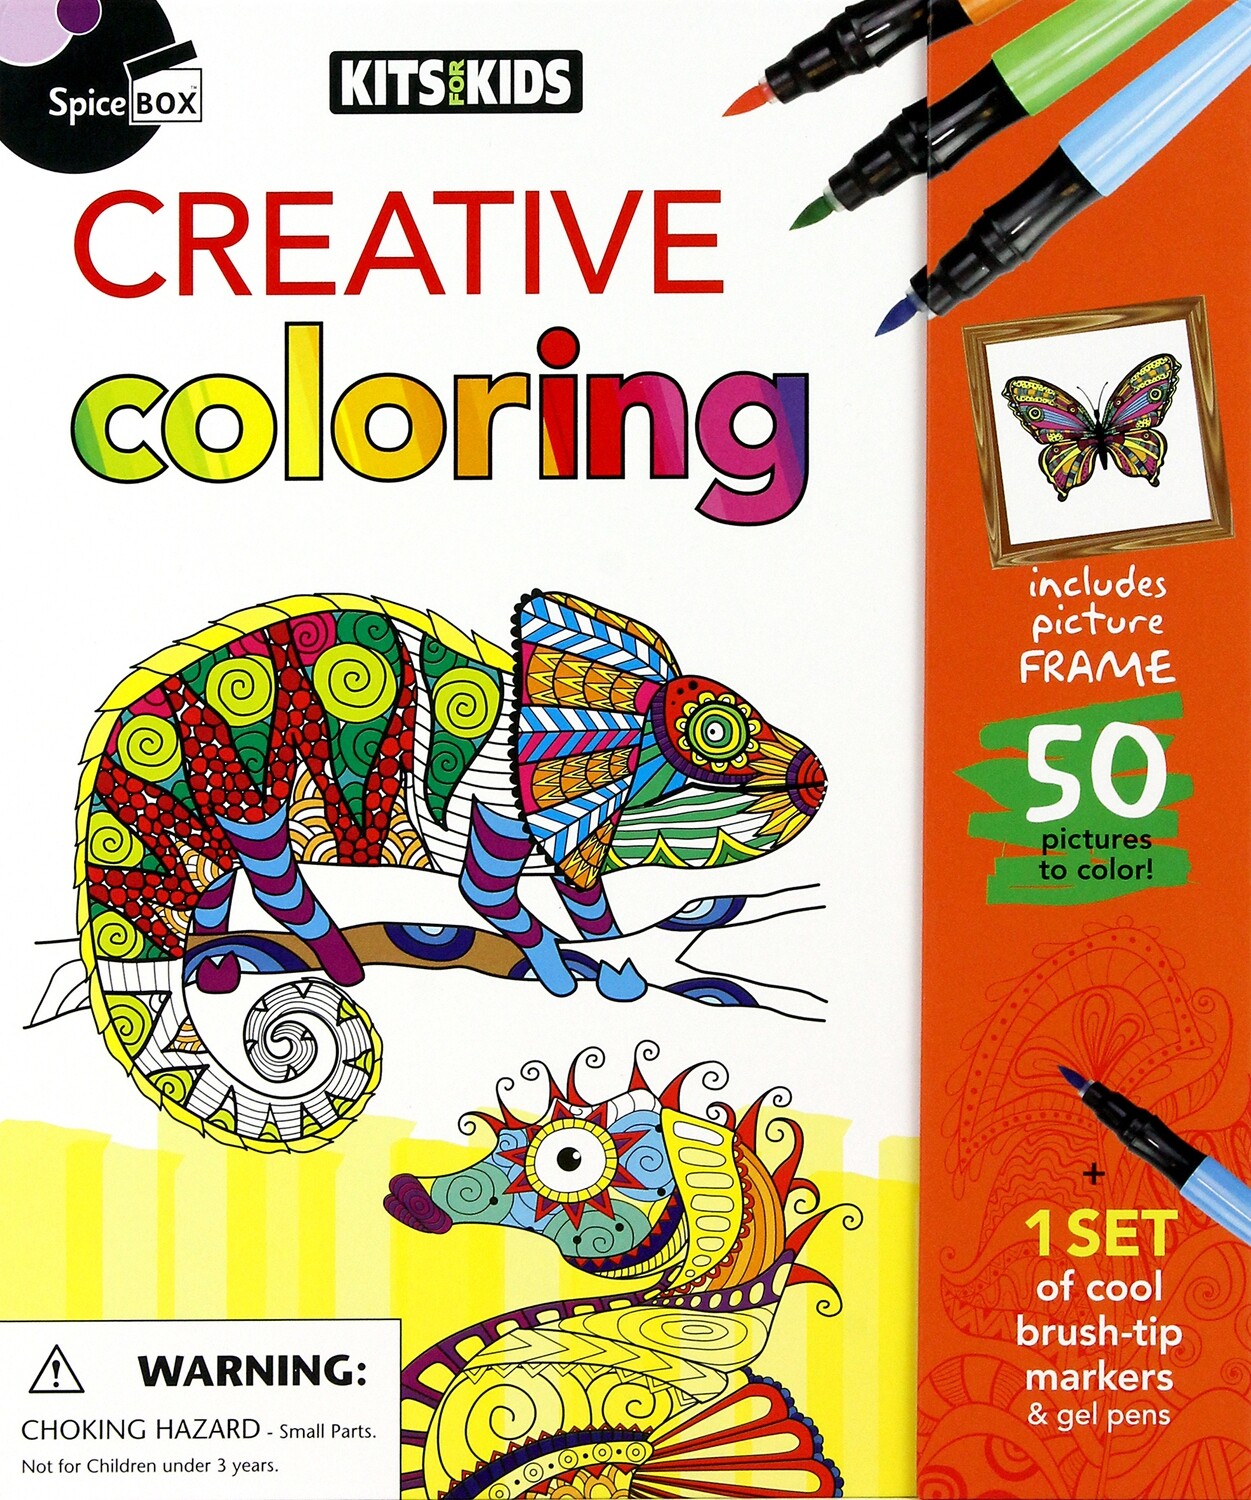 Book Kit: Kits For Kids Creative Colouring